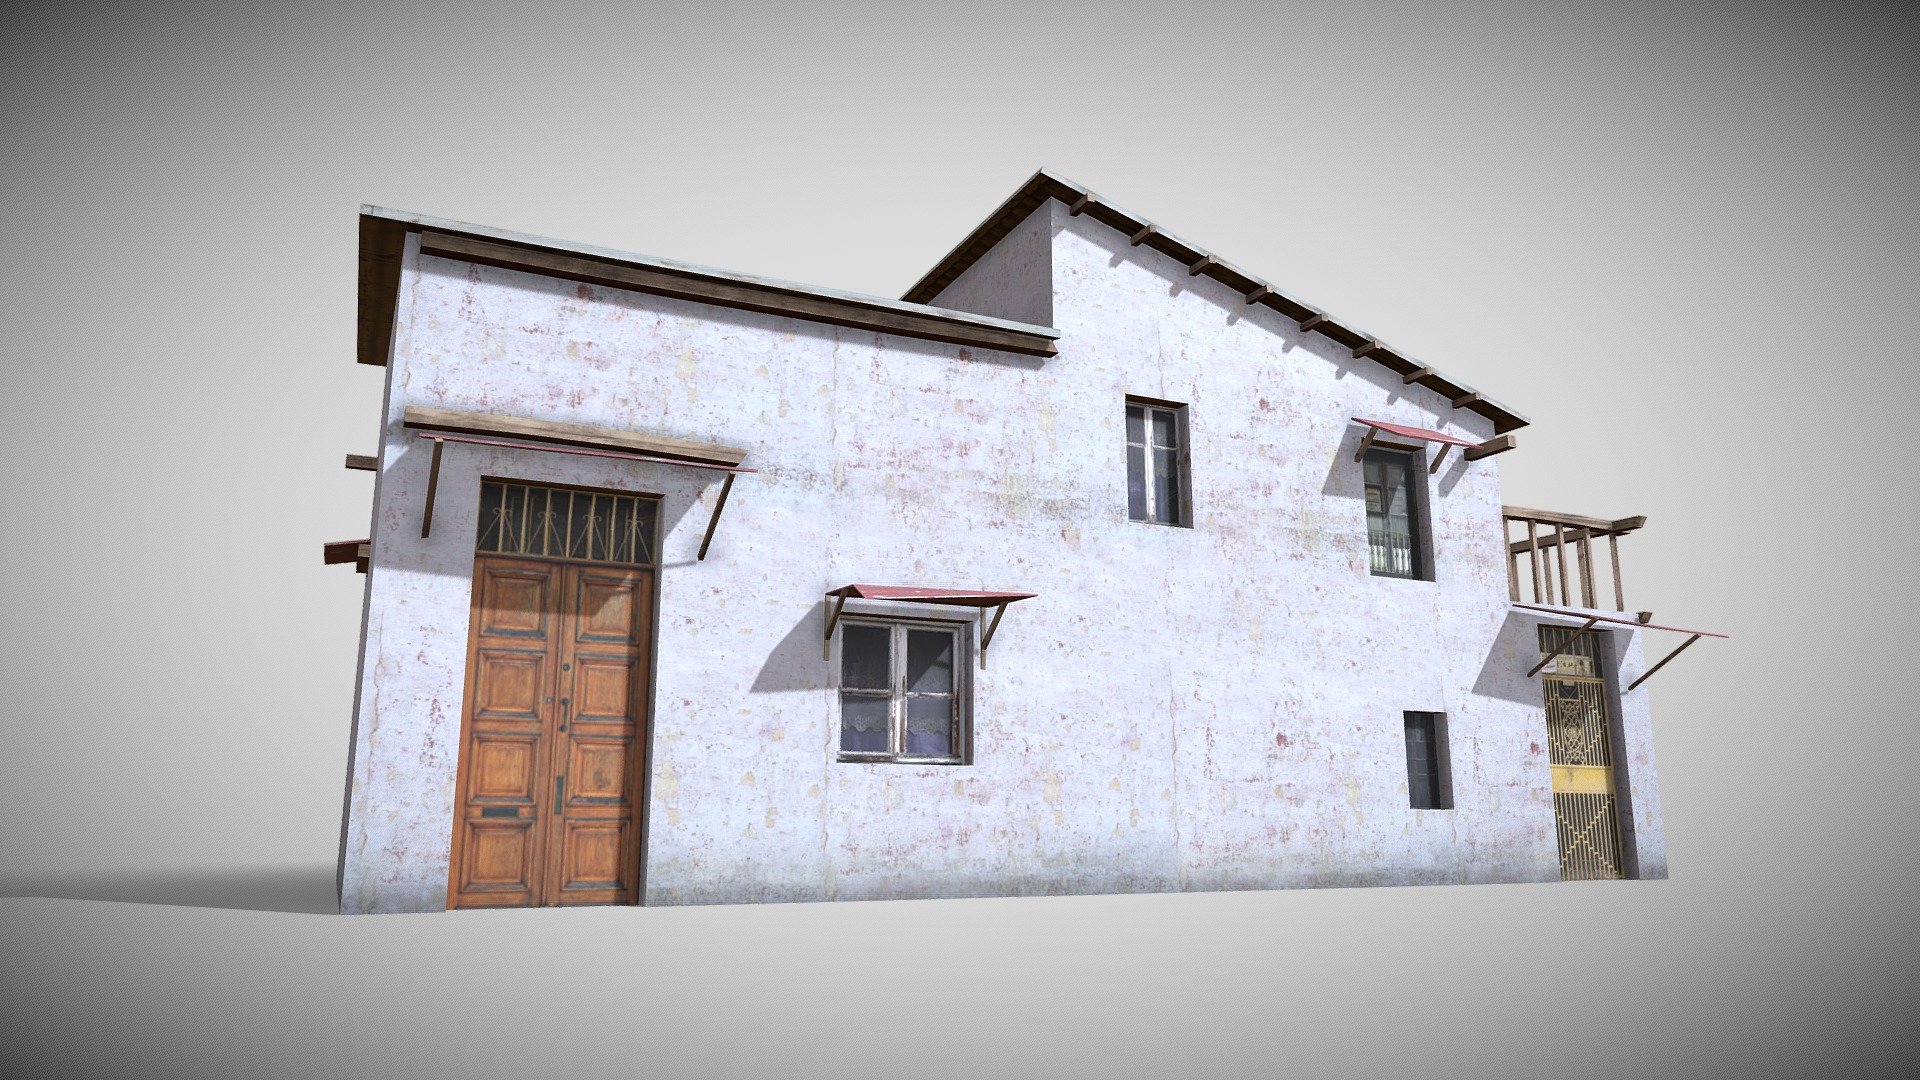 Game Ready 3D Old House /slum Native file format 3Ds max 2022 Other formats Blender 4.0 ,FBX, OBJ, All formats include materials &amp; textures

Polygons- 484   Vertices-626

Materials &amp; textures. 1 Diffuse Map 2048x2048 - Slum X7 - Buy Royalty Free 3D model by 3DRK (@3DRK98) 3d model